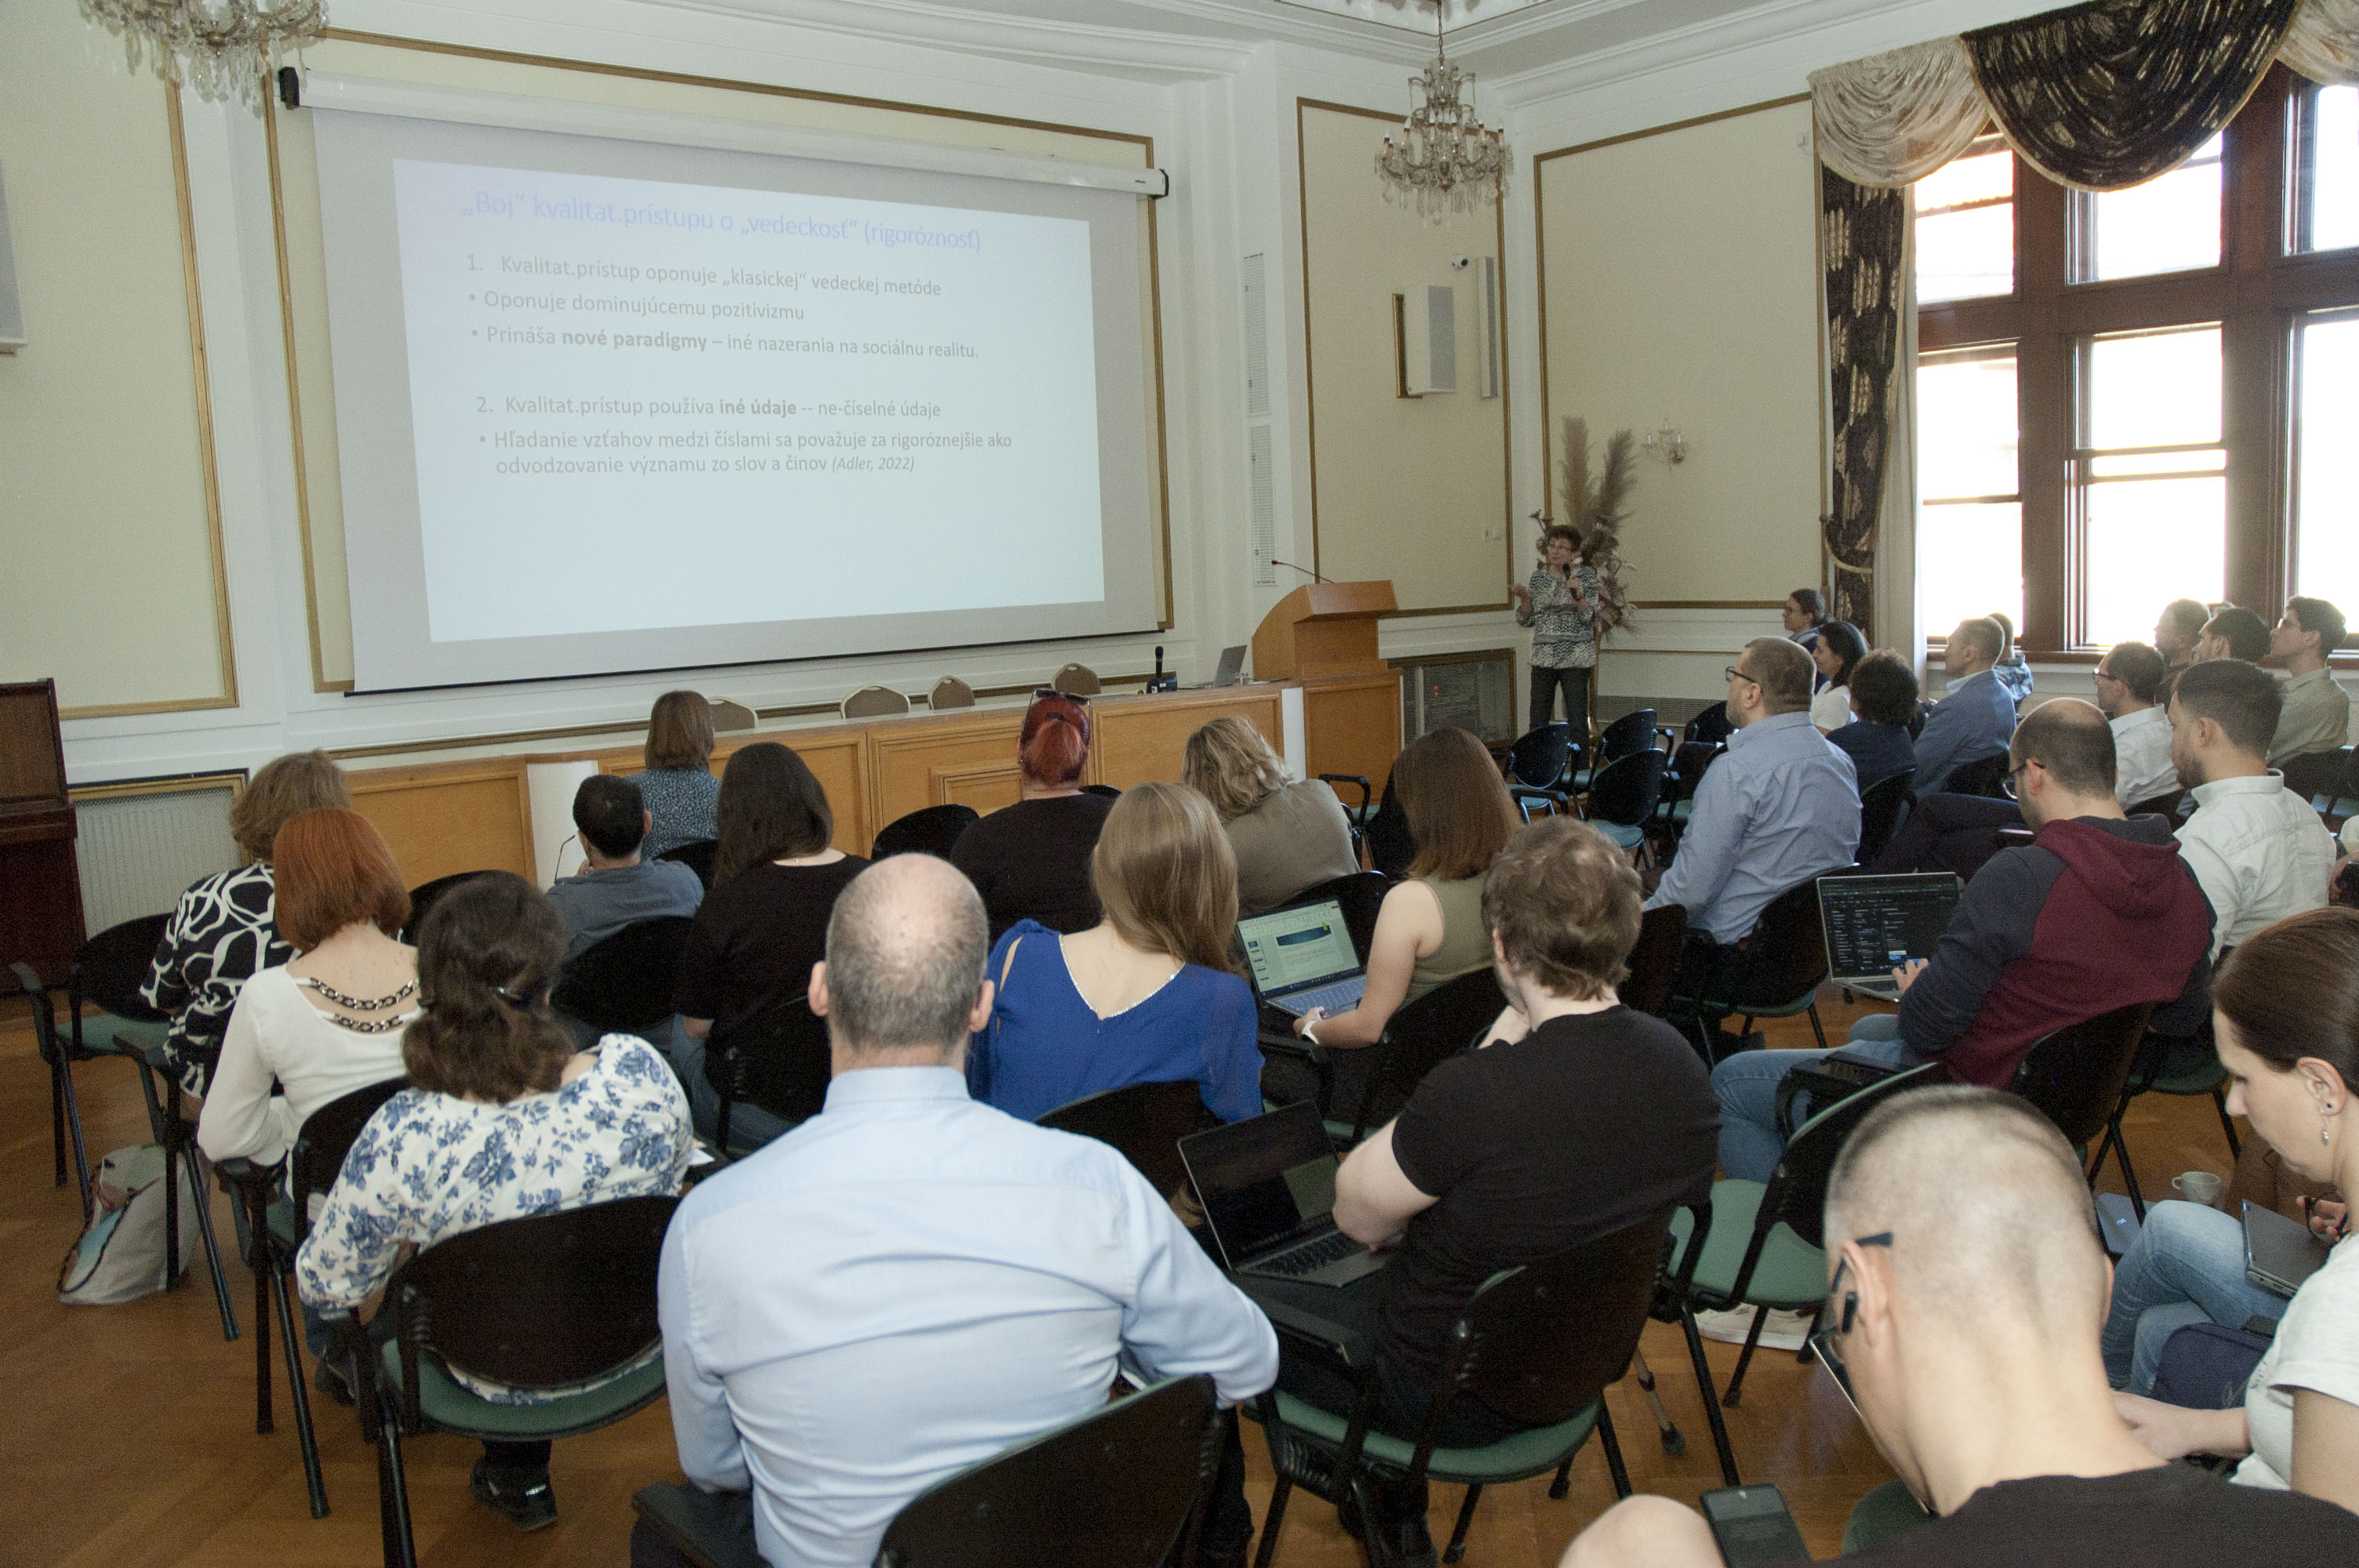 A successful first edition of the Research for Social and Psychological Sciences conference